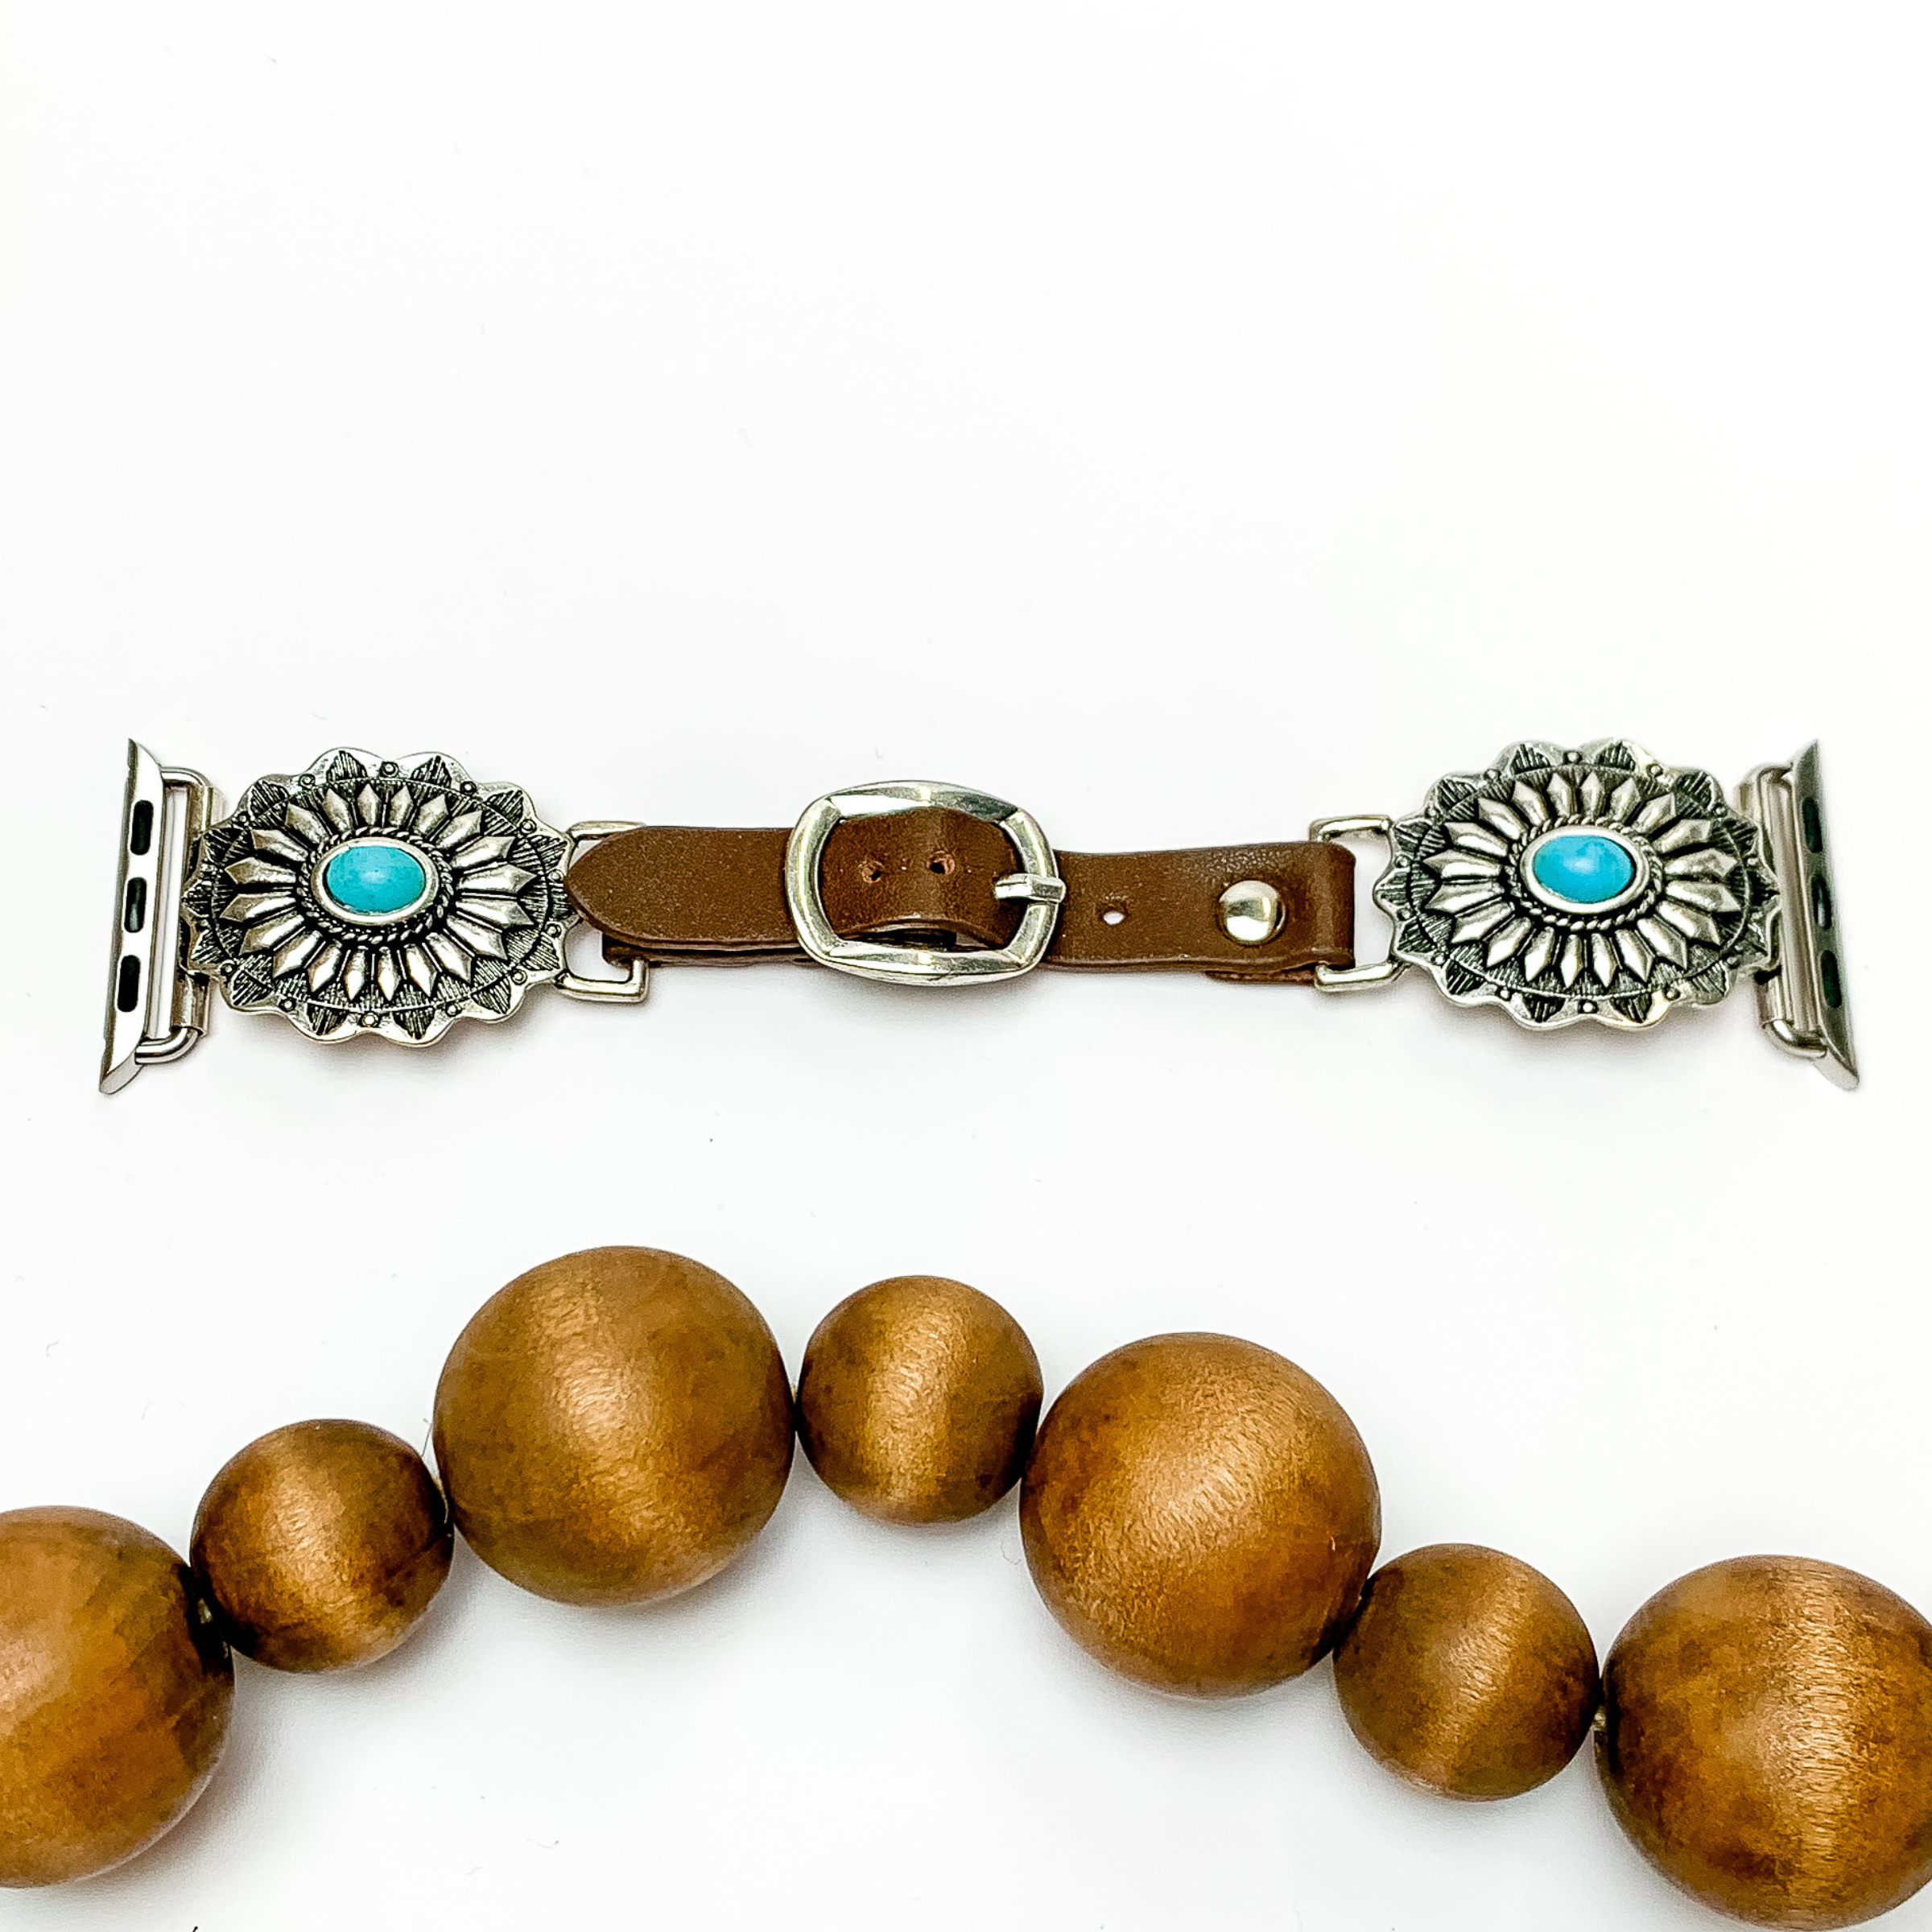 Brown Apple Watch Band with Silver Conchos and Turquoise Stones